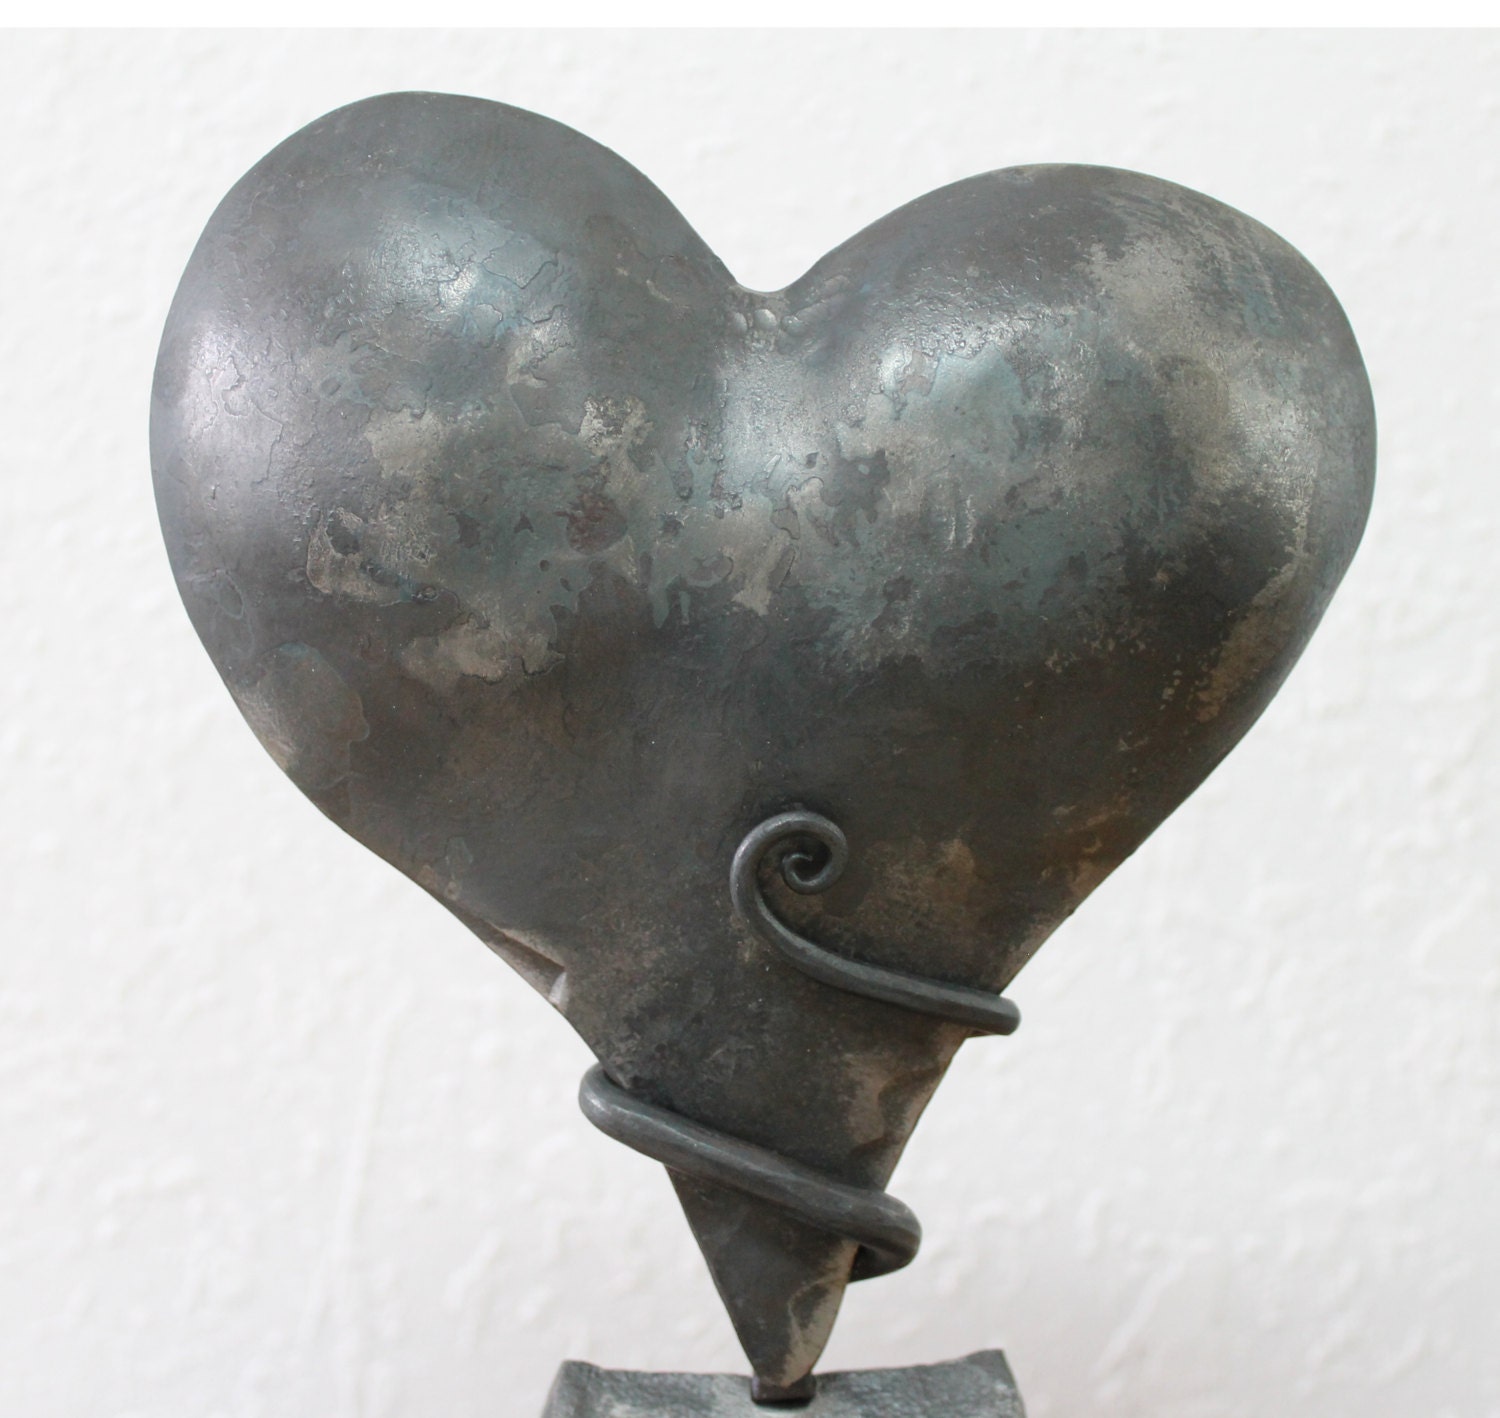 Iron Anniversary Gifts
 Iron Anniversary t Heart Sculpture Personalized 6th